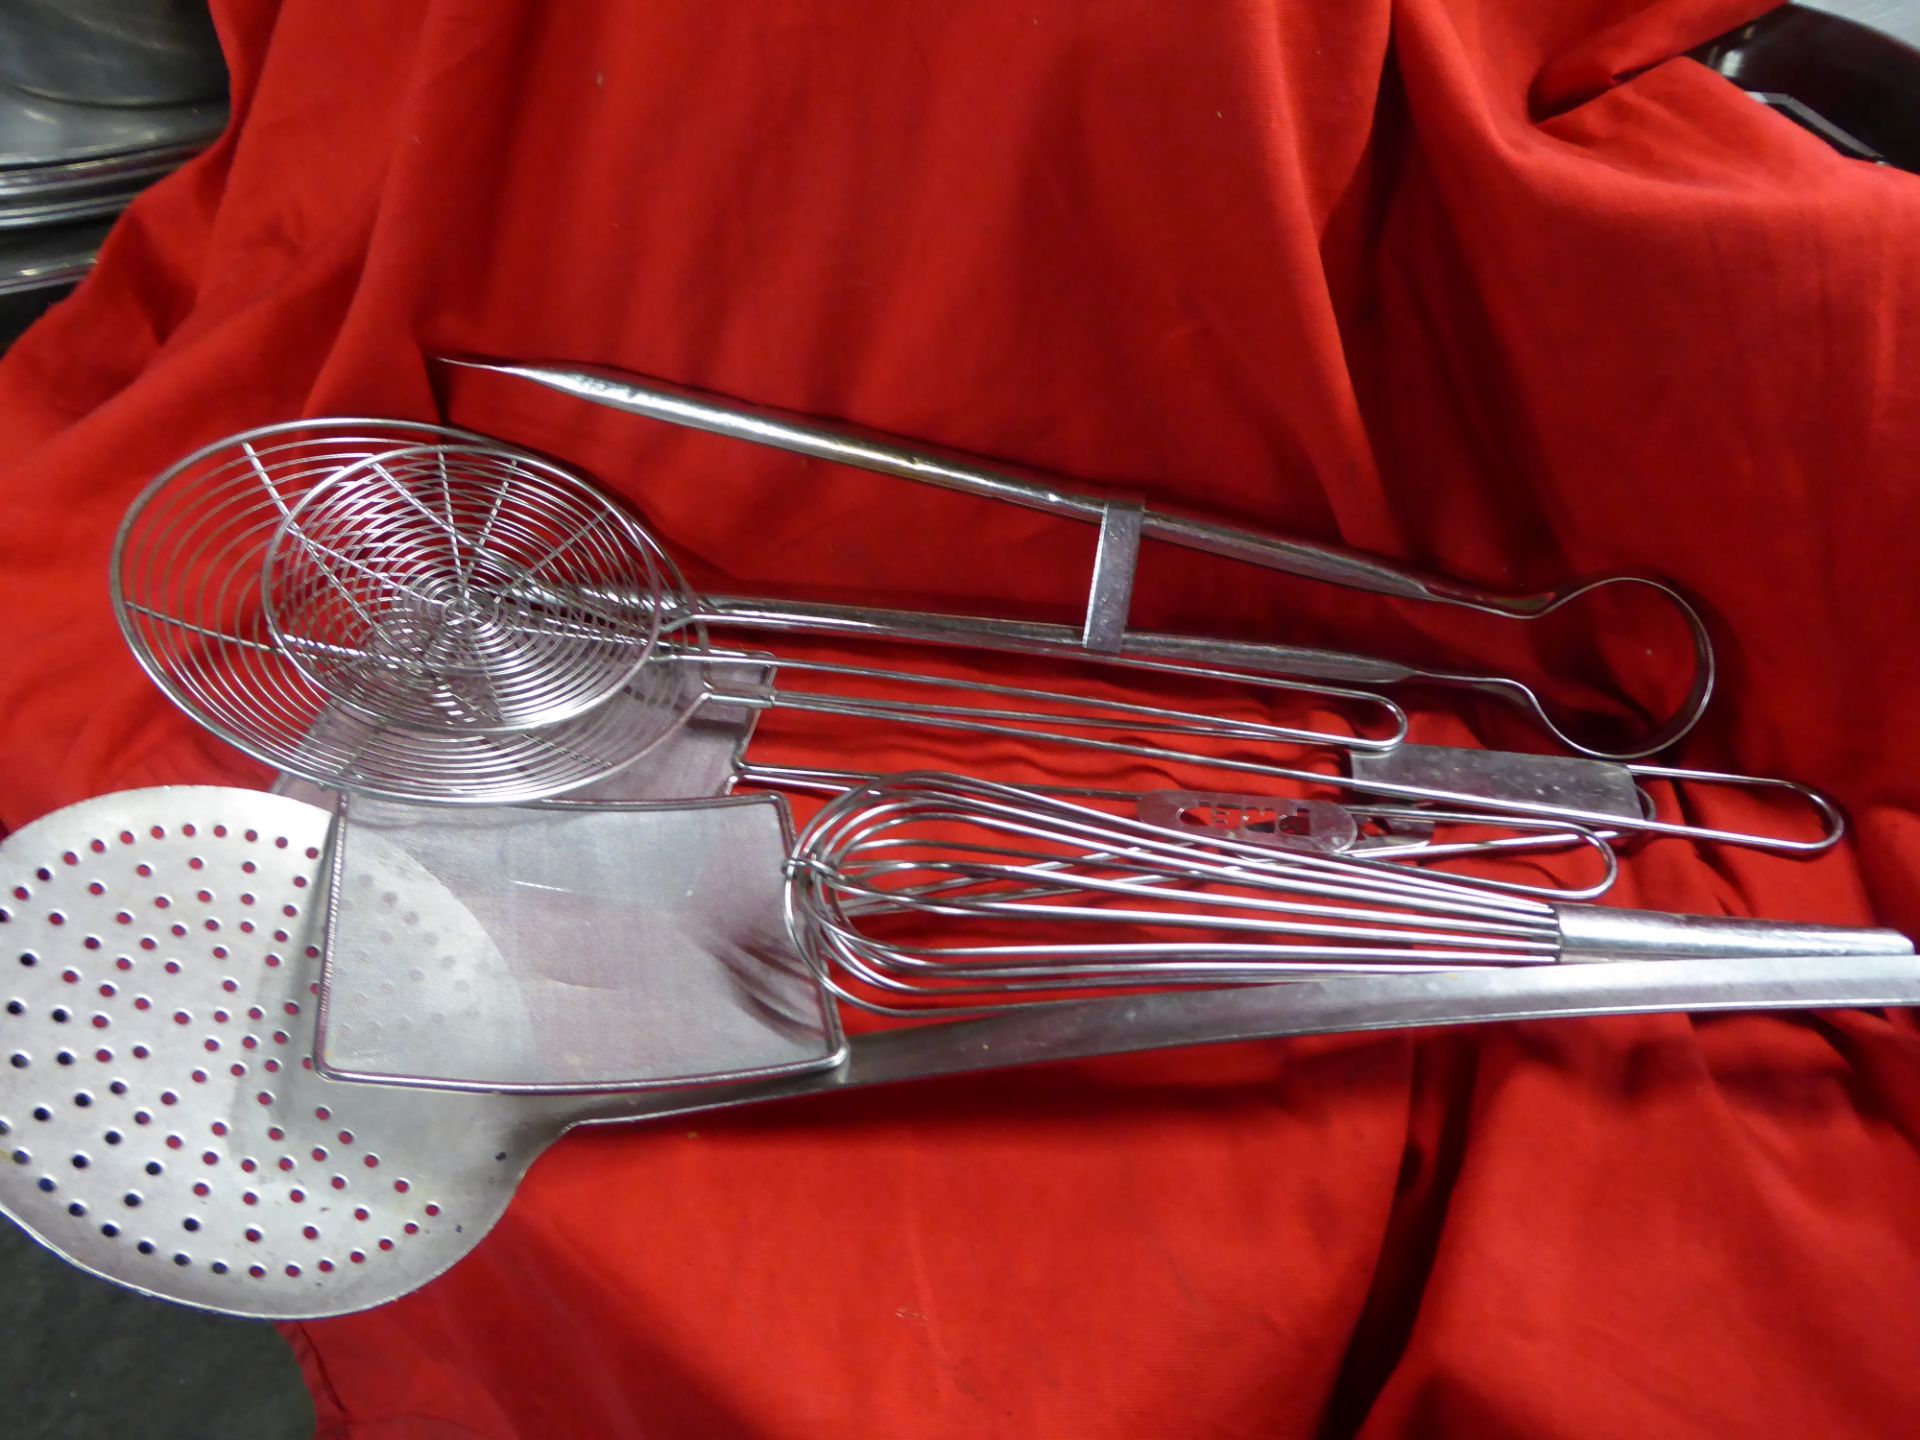 *S/S kitchen utensils x 7 including spiders, whisk and tongs